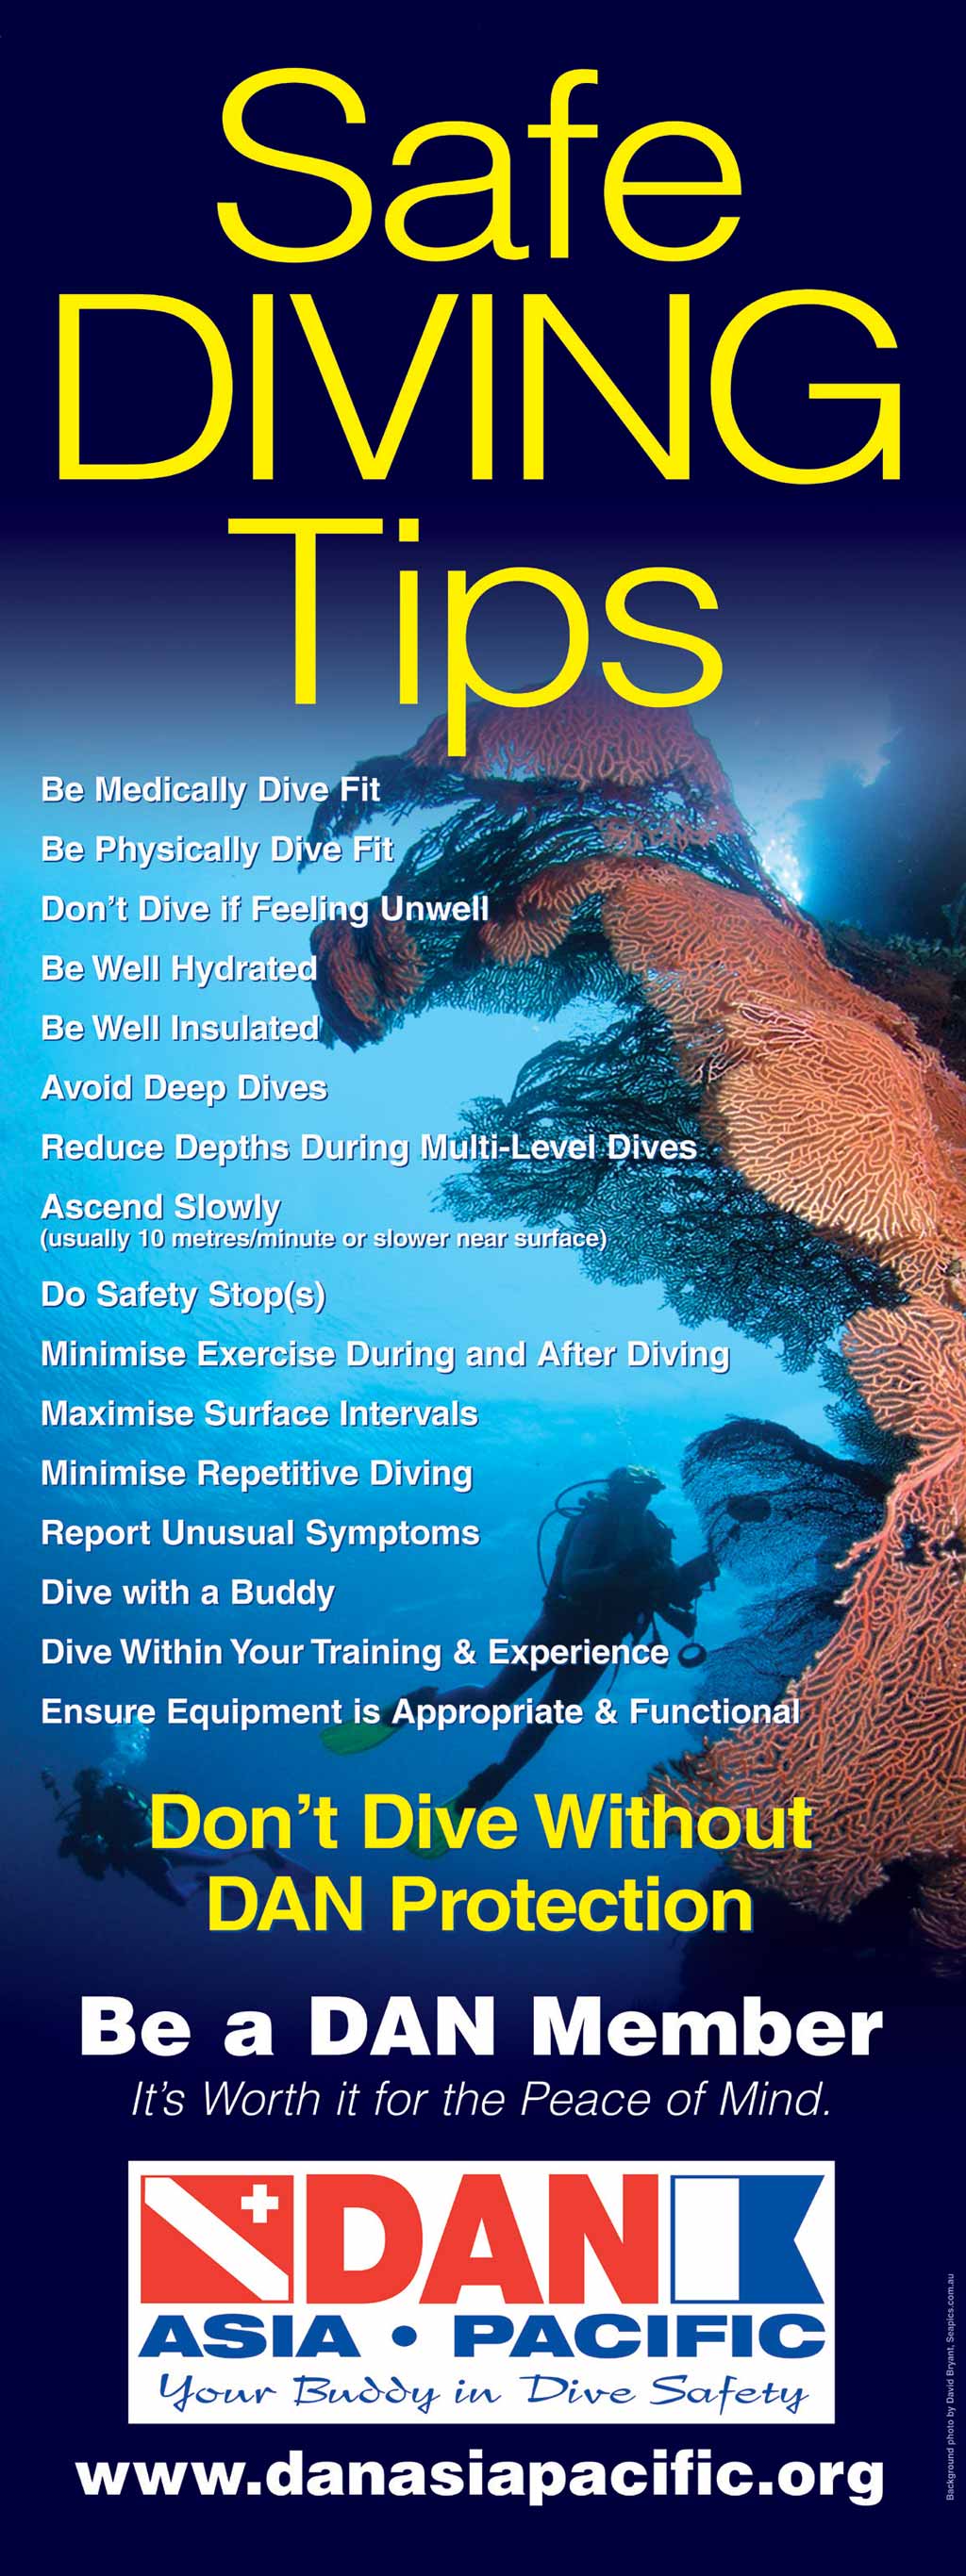 Divers should respond faster to Decompression illness symptoms by calling DAN for advice